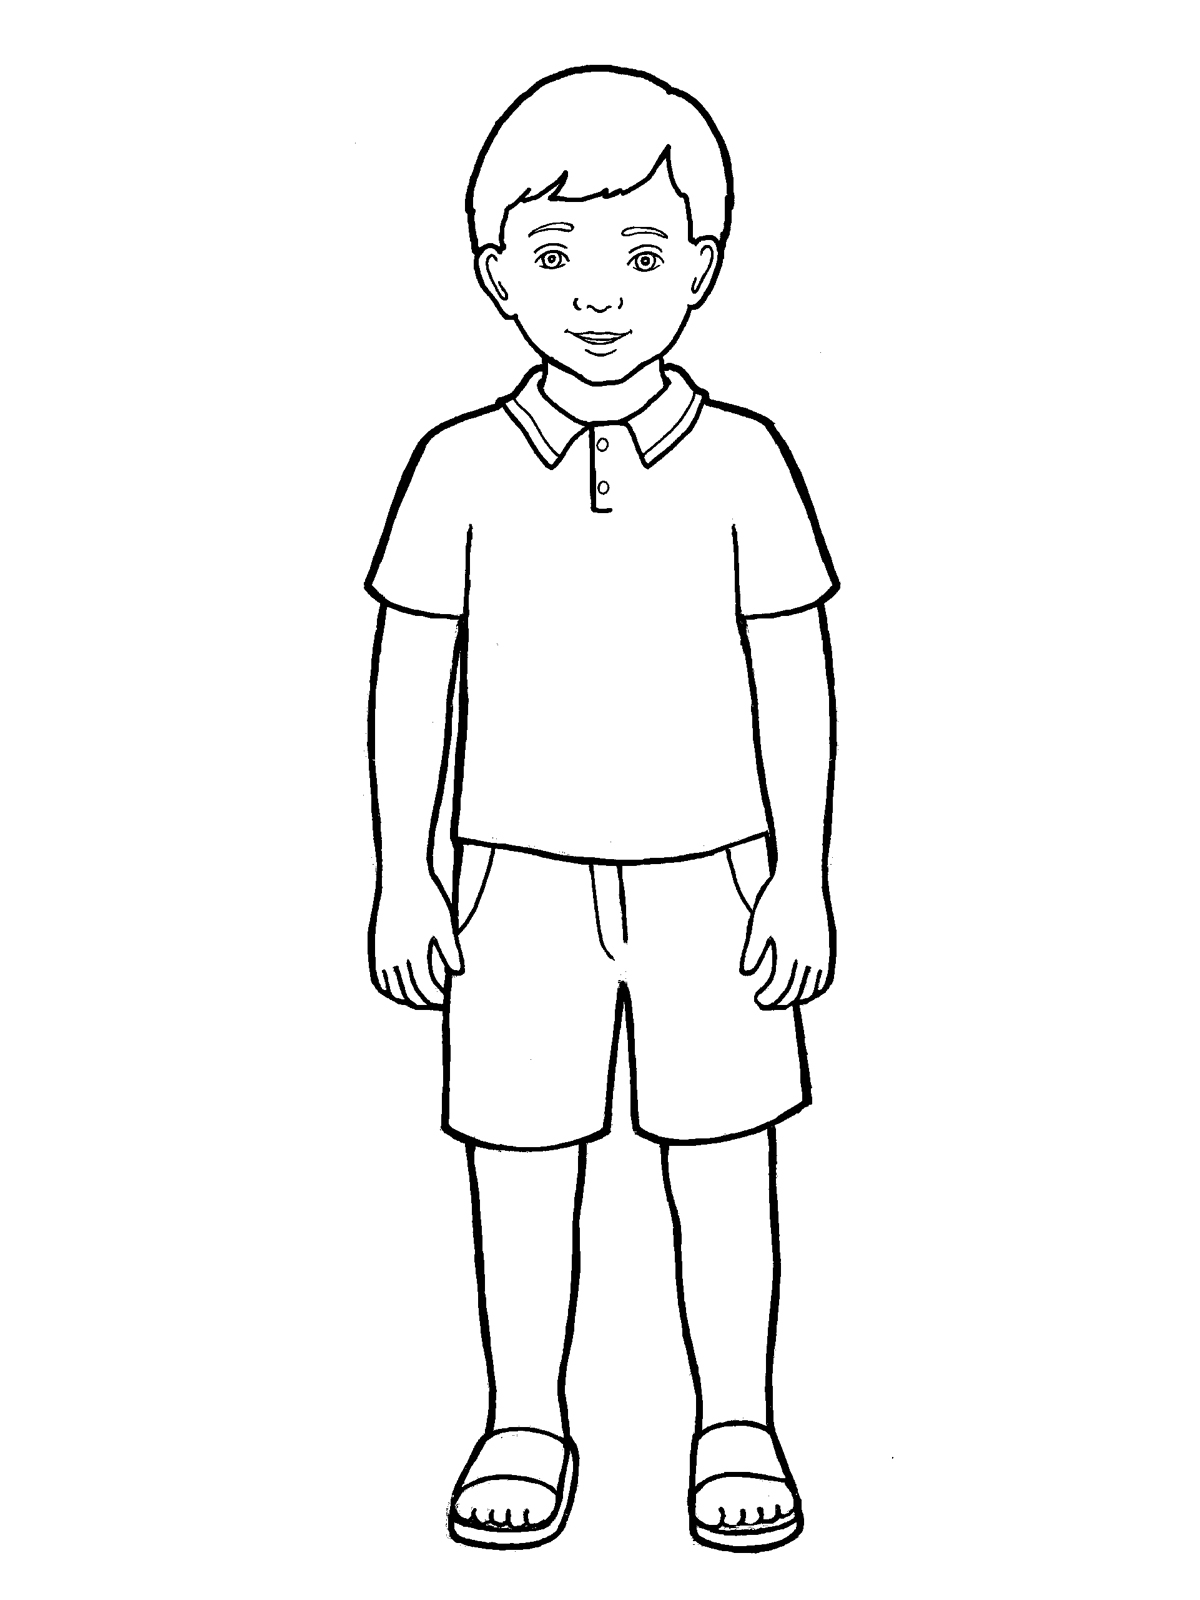 Lds boy clipart black and white